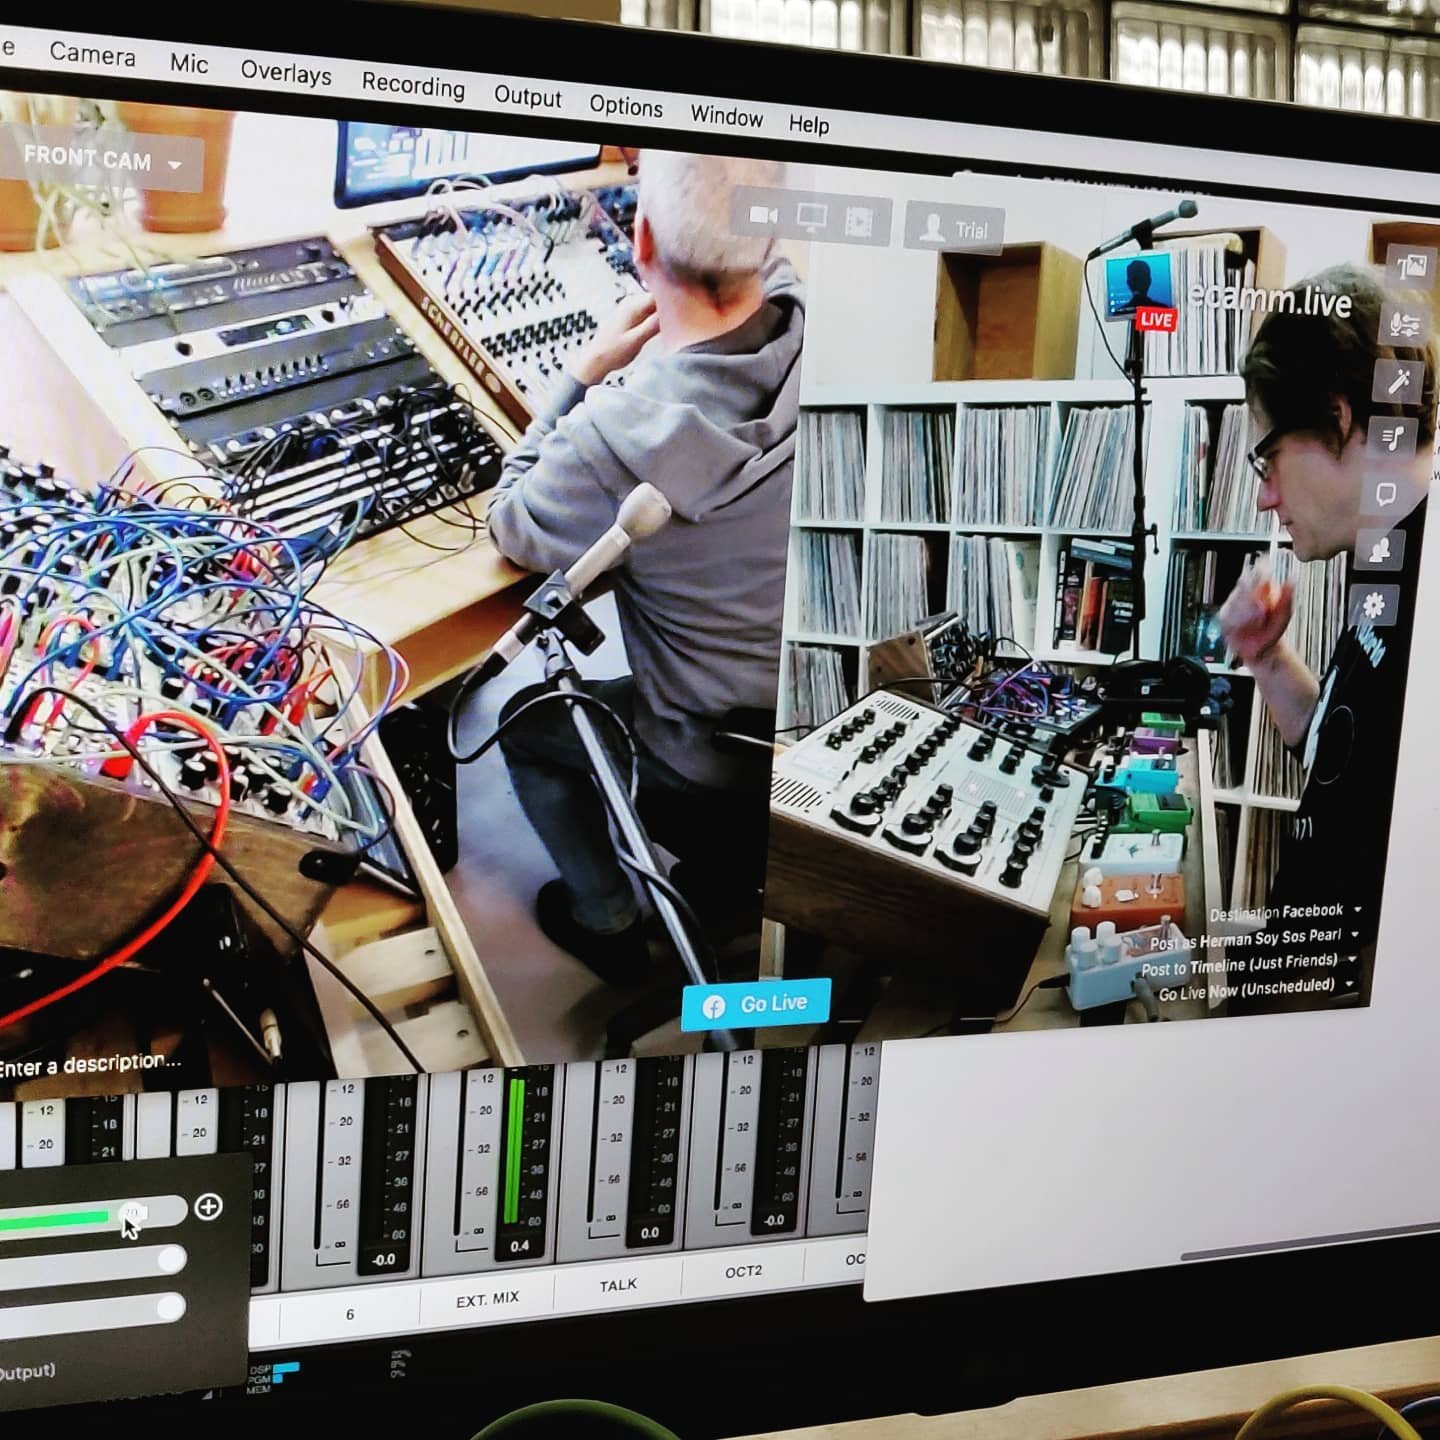 Going live tonight at 8. Richard @pghmodular and I will have a chat and a jam sesh in my new studio location. Tune in at https://youtu.be/TvsCmuKJkHw